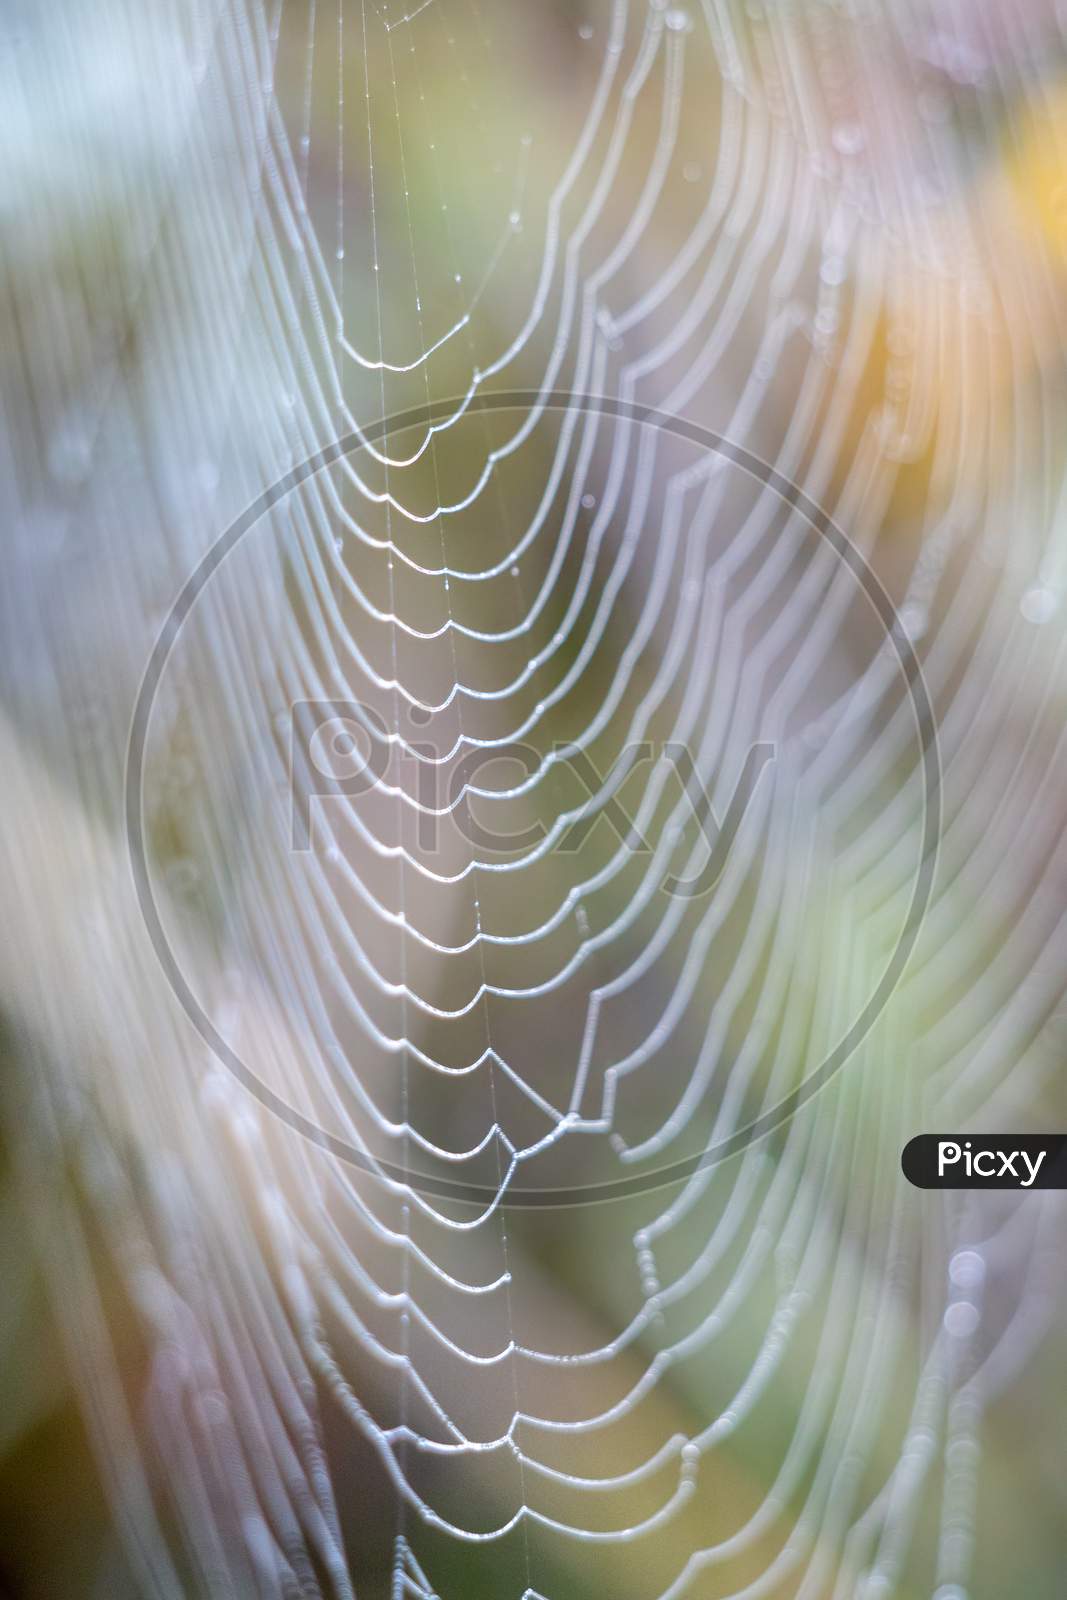 Spiders Web Glistening With Water Droplets From The Dew